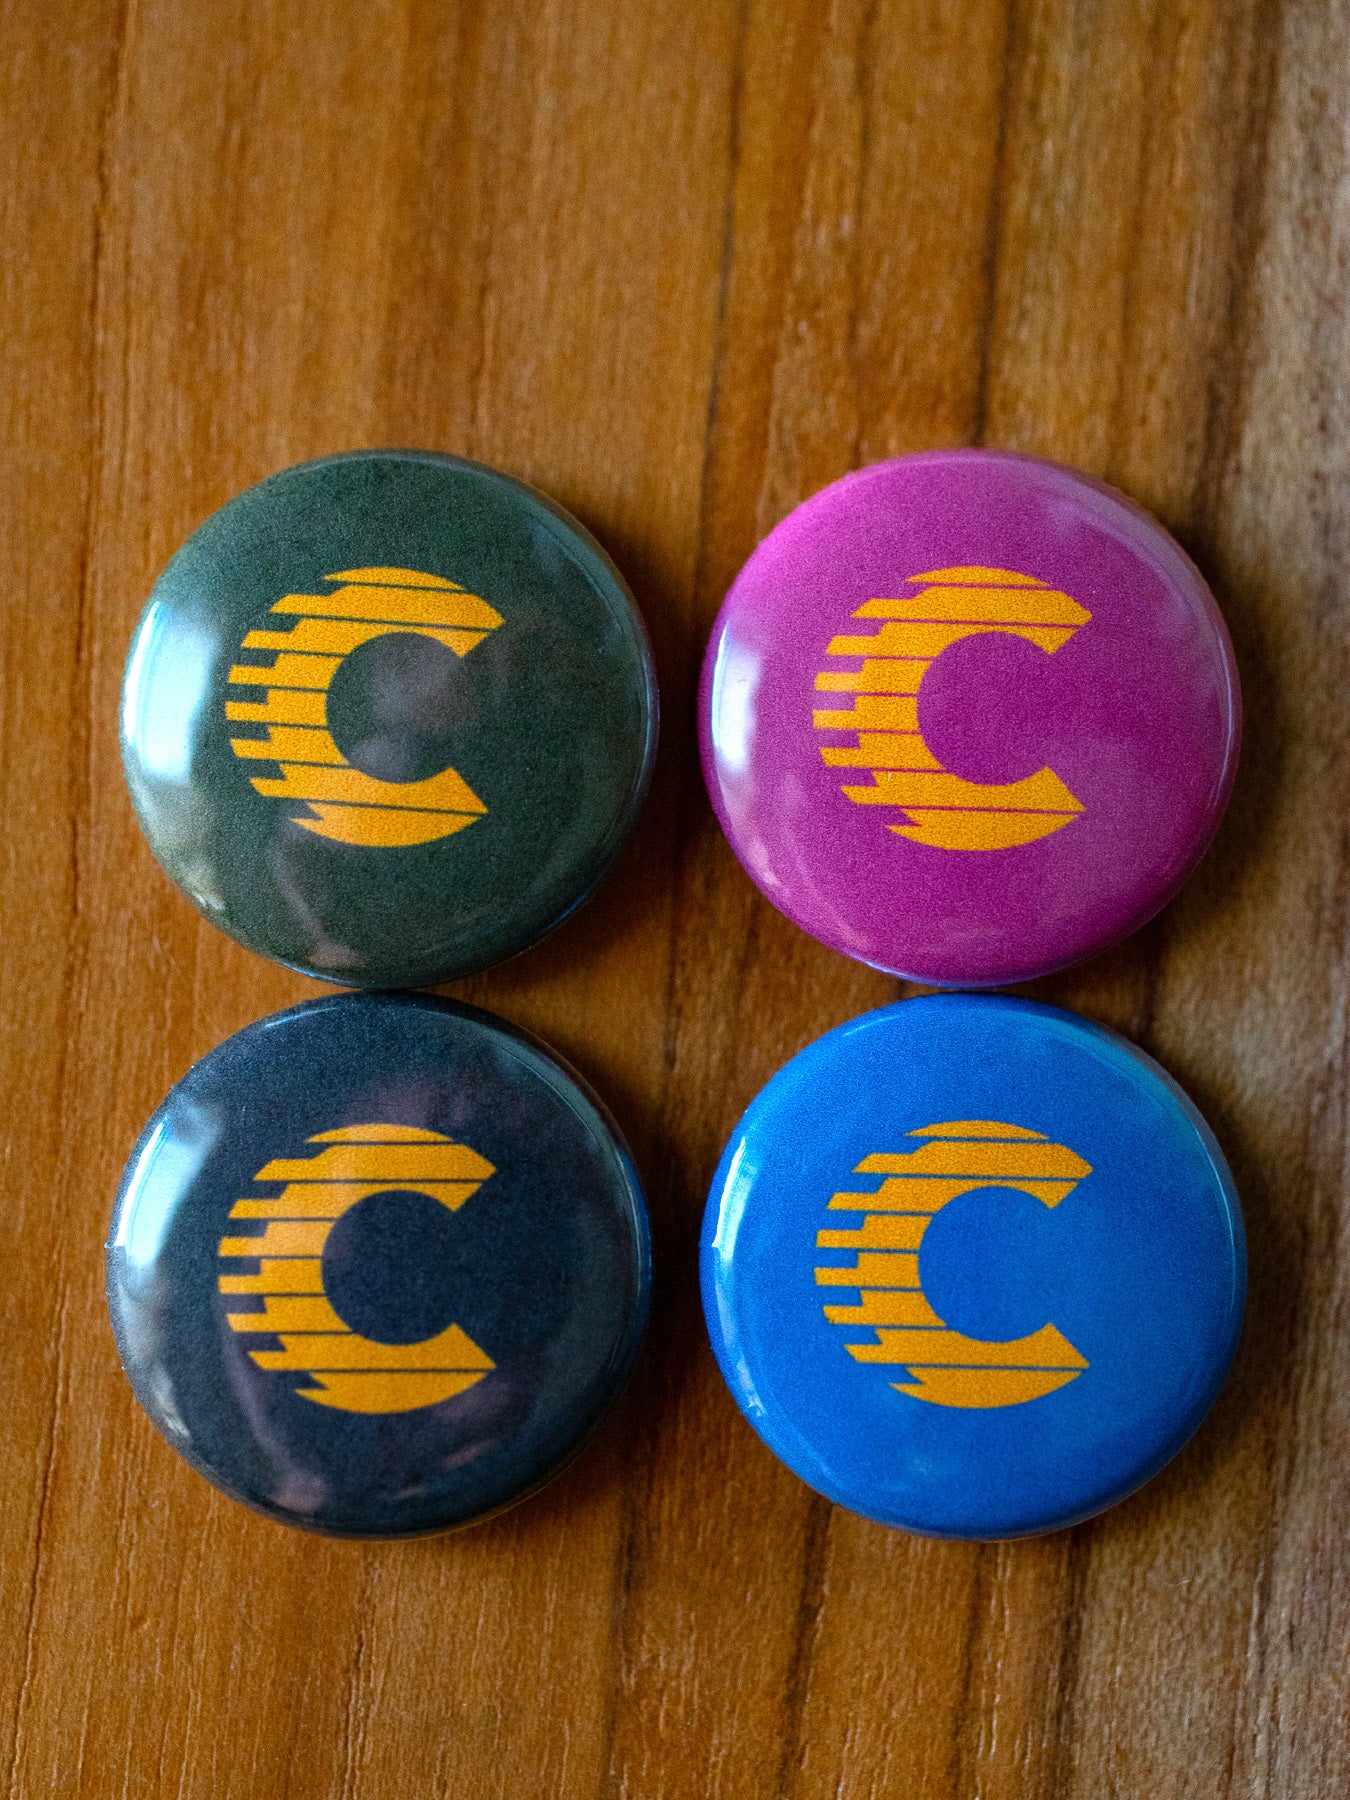 Cooled Collective 1" Buttons